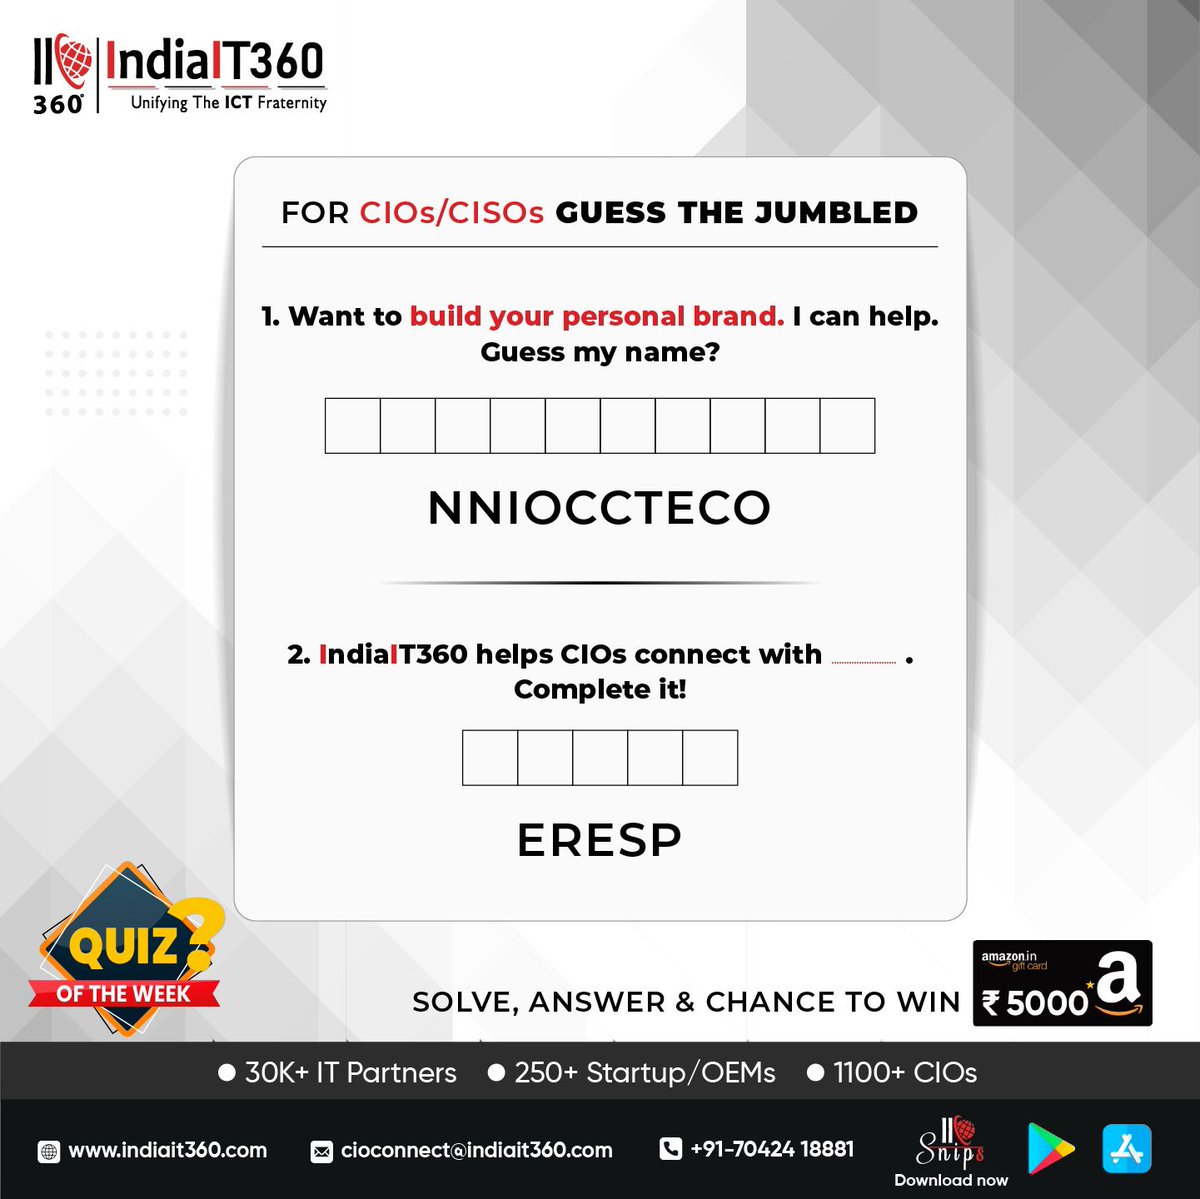 Guess! Comment! Win!! Solve the jumbled words related to IndiaIT360's CIO Connect platform and Win Rs.5000 Amazon Voucher. Also, Like, Share, and Repost to let the reward flow your way. #IndiaIT360 #QuizOfTheWeek #ContestAlert #SolveAndWin #CommentToWin #GetLucky #quiz